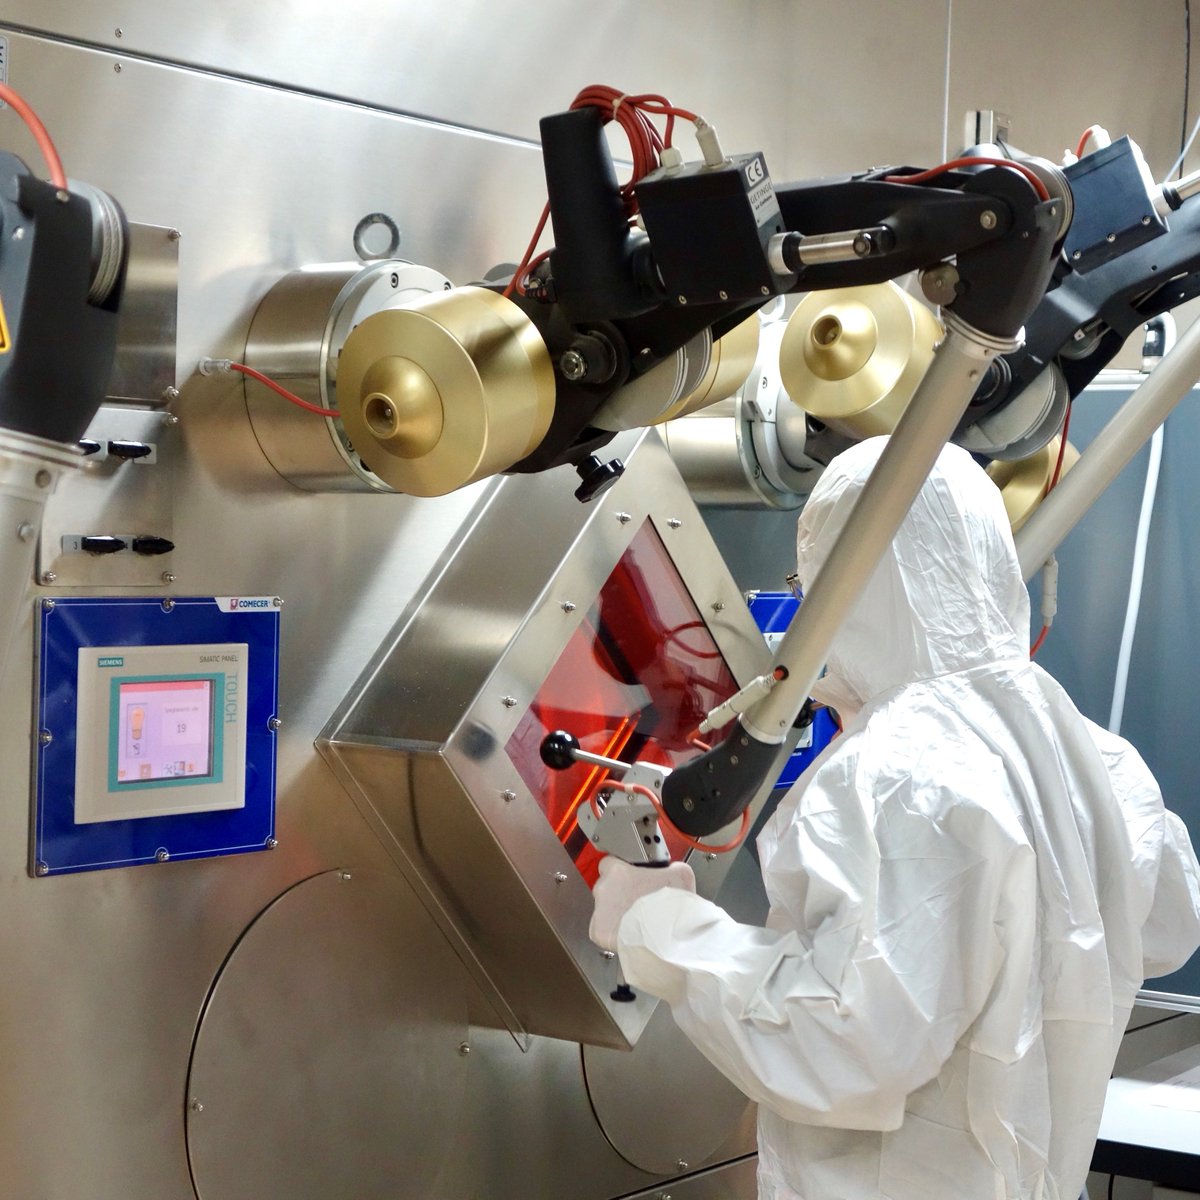 Robot-like arms & a hot cell container help keep workers safe as they move around #radiopharmaceuticals, specialized drugs that contain small amounts of radioactive materials. Doctors use radiopharmaceuticals for diagnosing and treating diseases like #cancer.